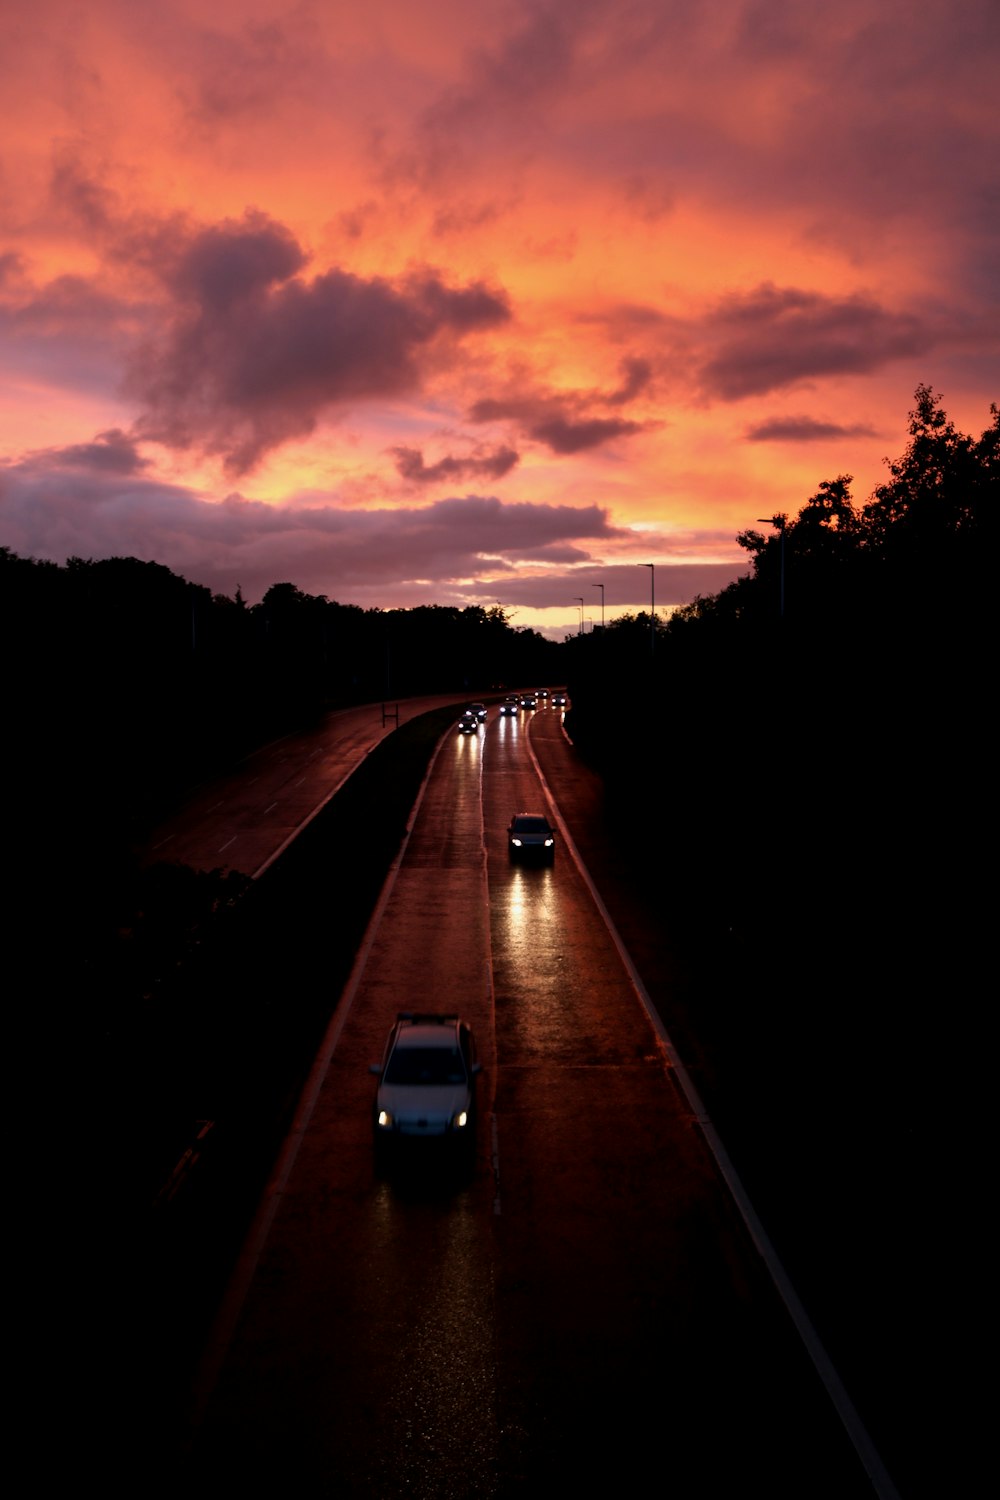 several vehicles on the road during sunset